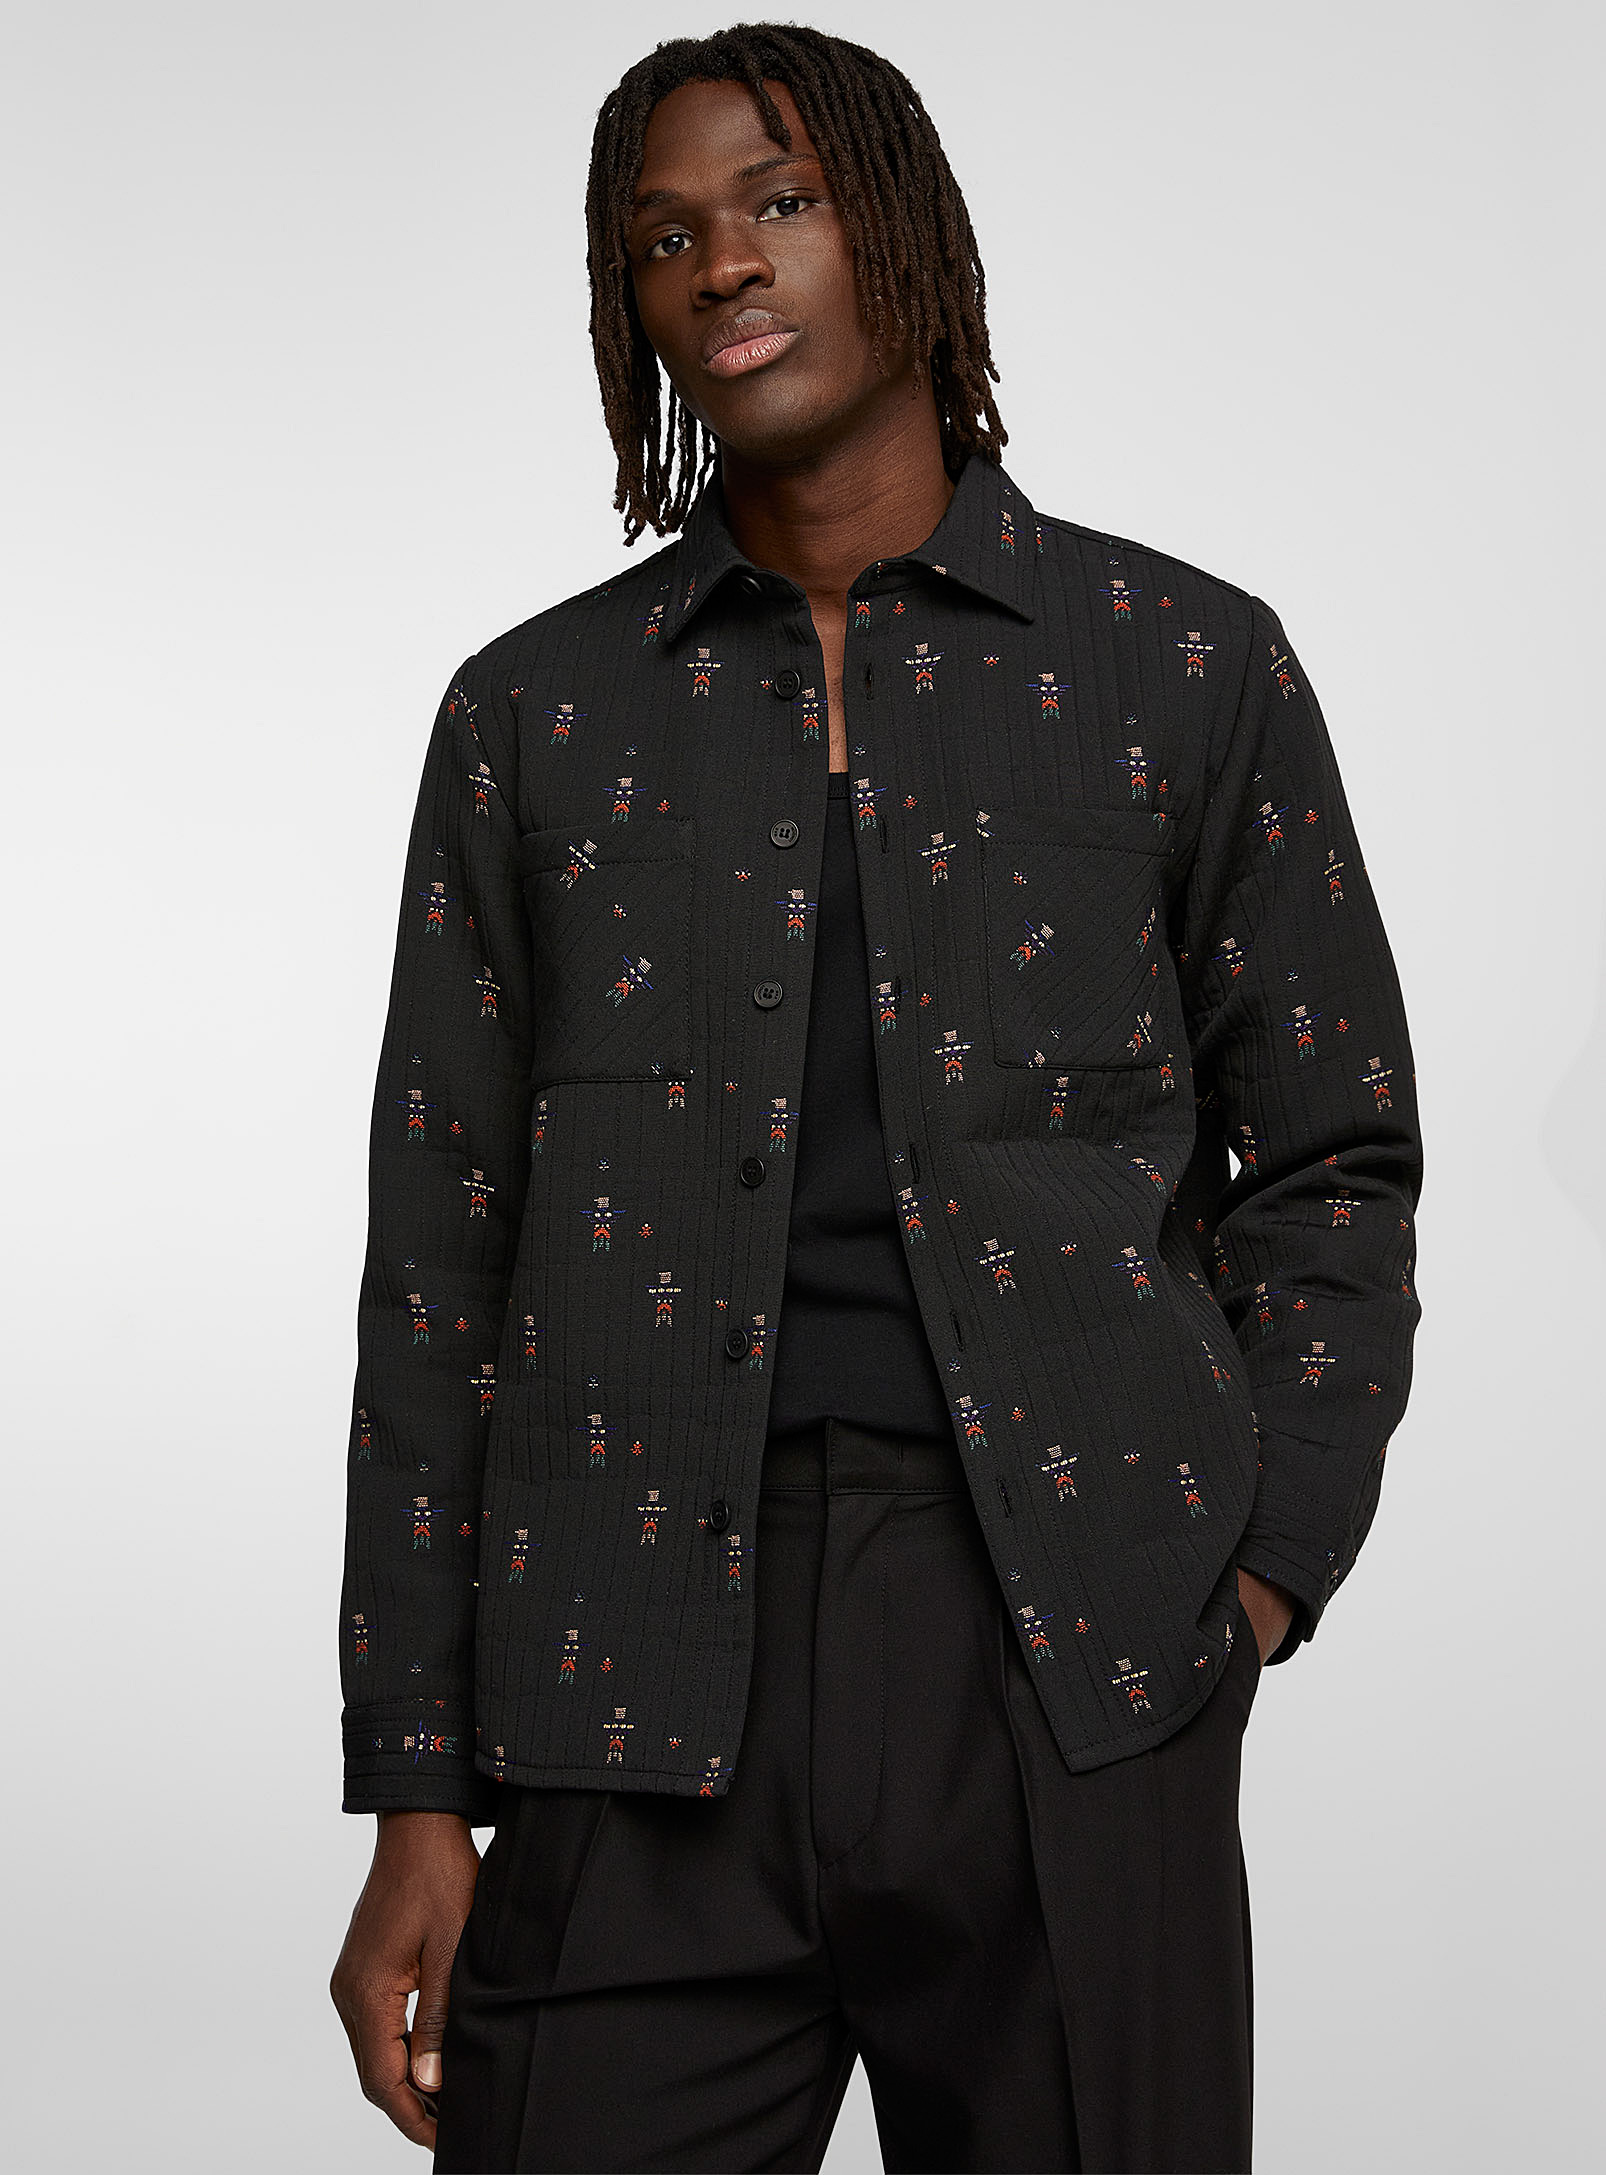 Wax London - Men's Totem embroidery embossed overshirt